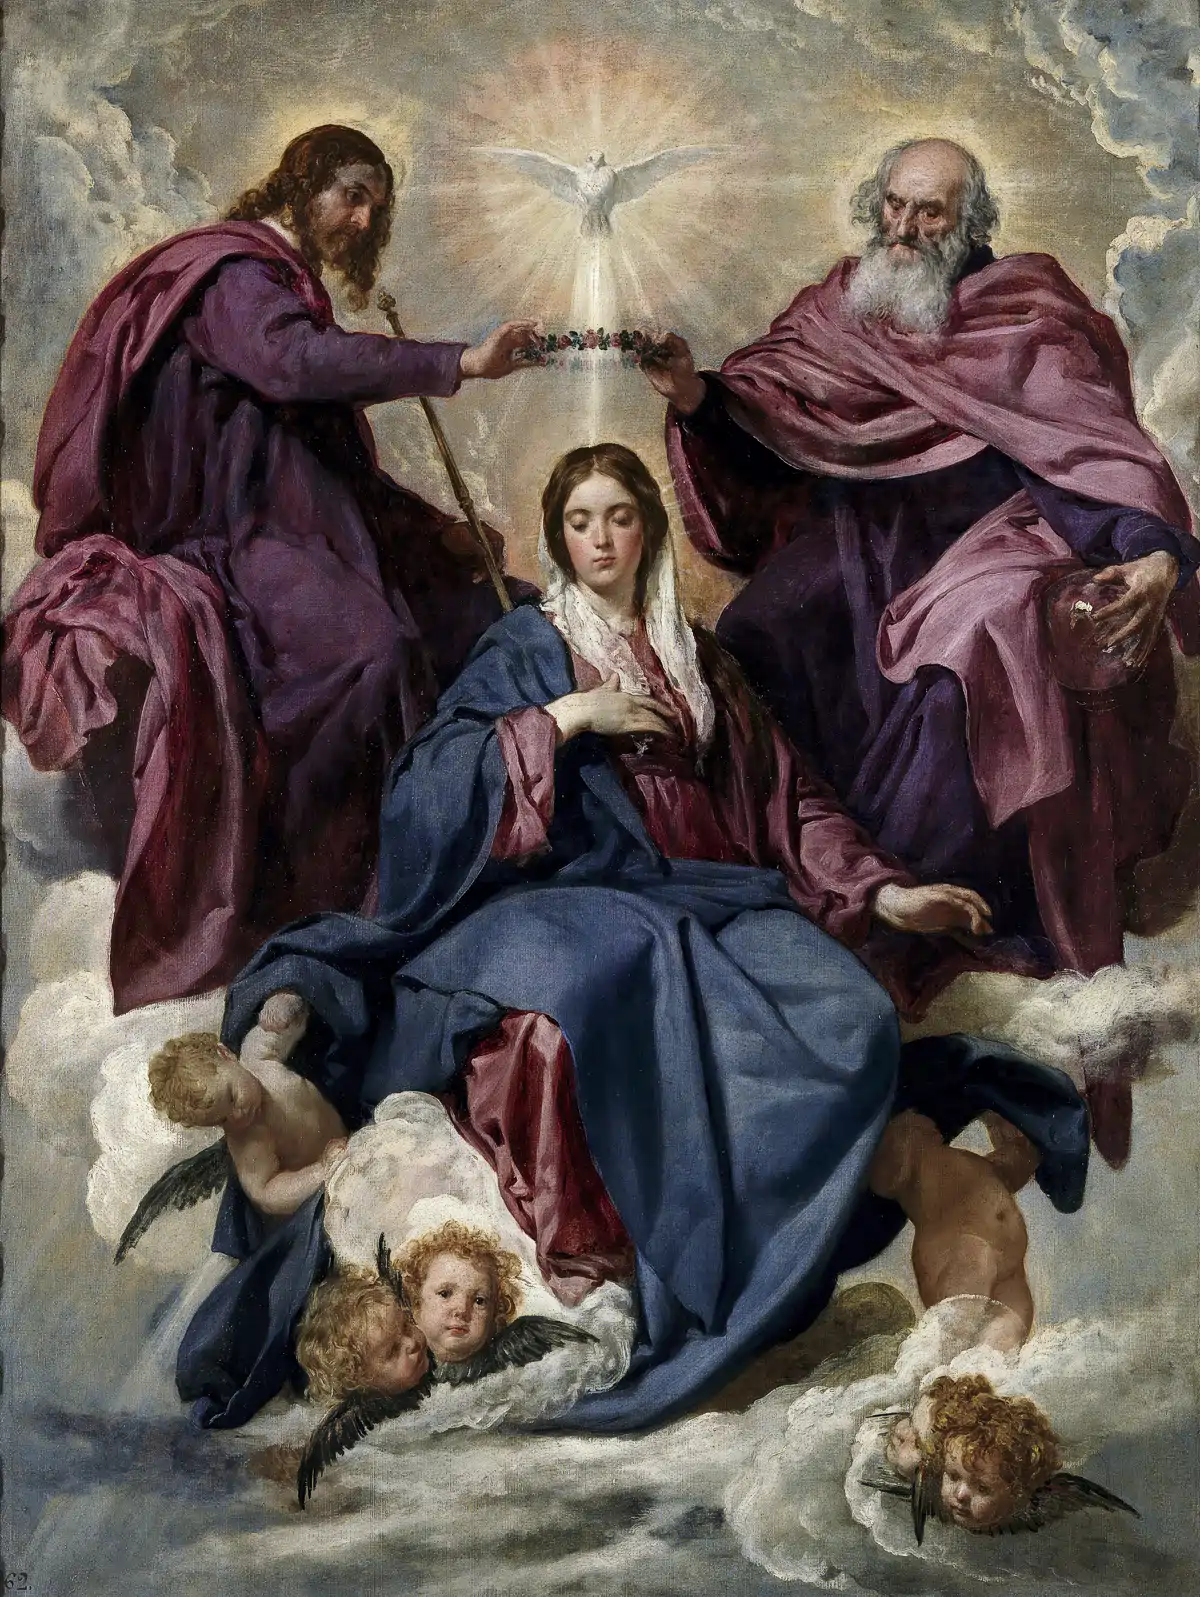 Mary is crowned as Queen of Heaven and Earth